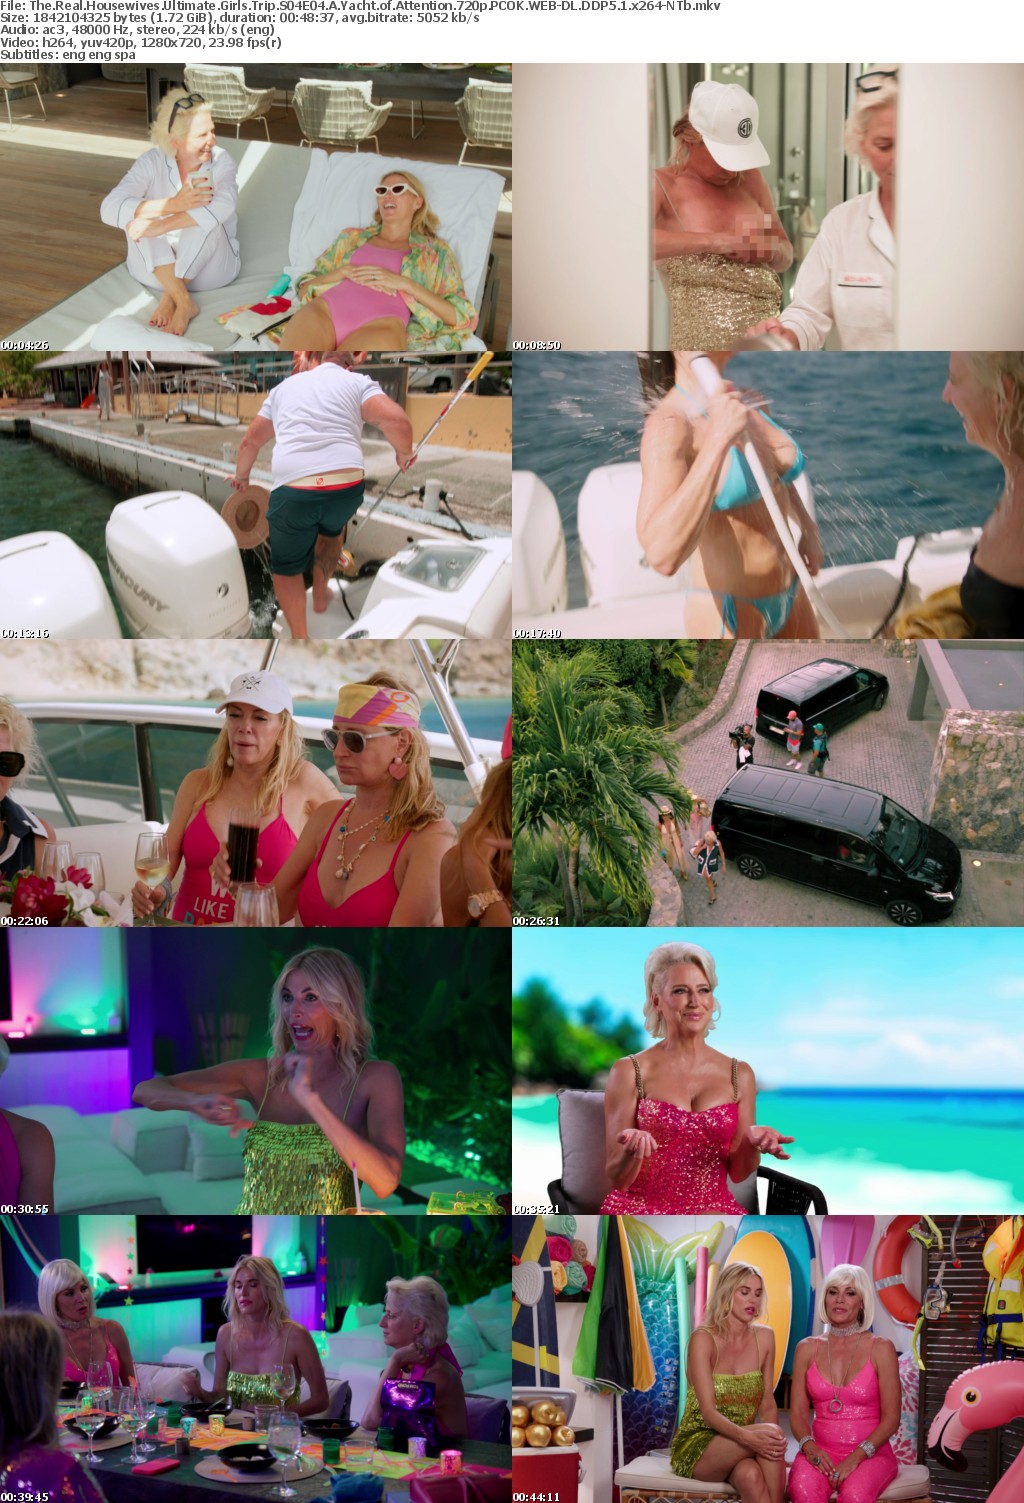 The Real Housewives Ultimate Girls Trip S04E04 A Yacht of Attention 720p PCOK WEB-DL DDP5 1 x264-NTb